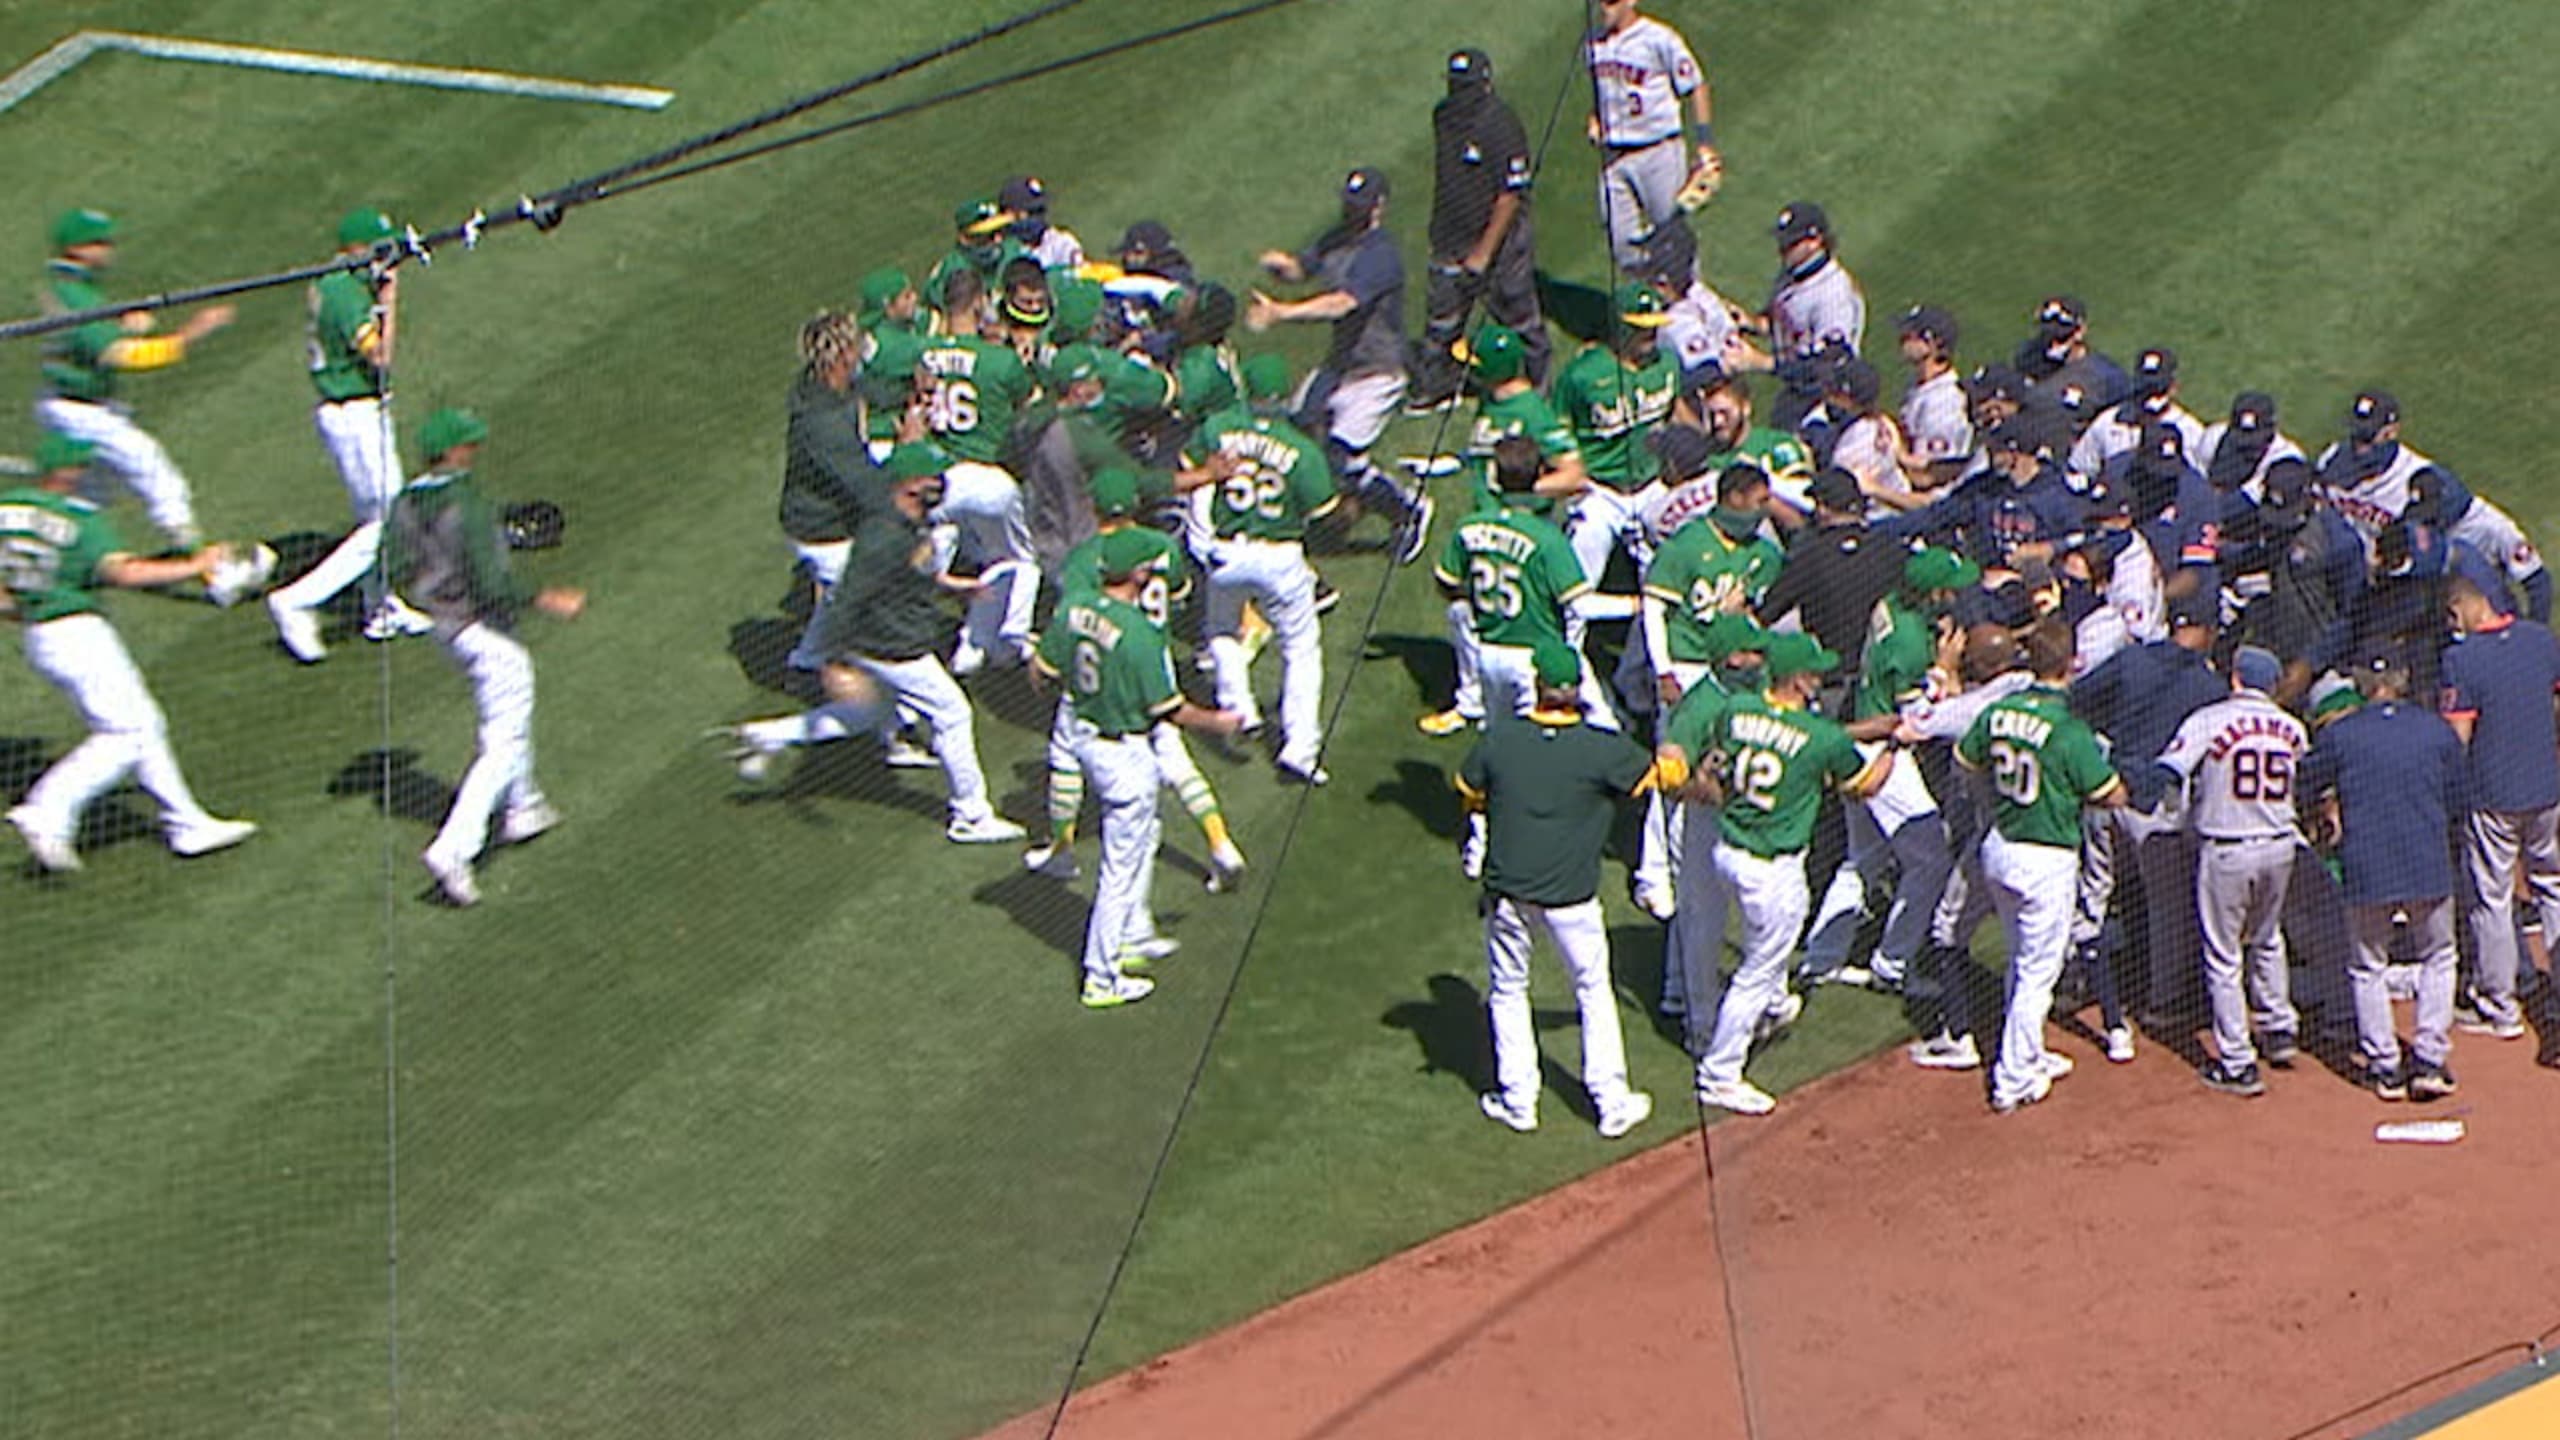 Anderson, Ramírez facing multi-game suspensions as MLB sorts out discipline  following wild brawl – KGET 17